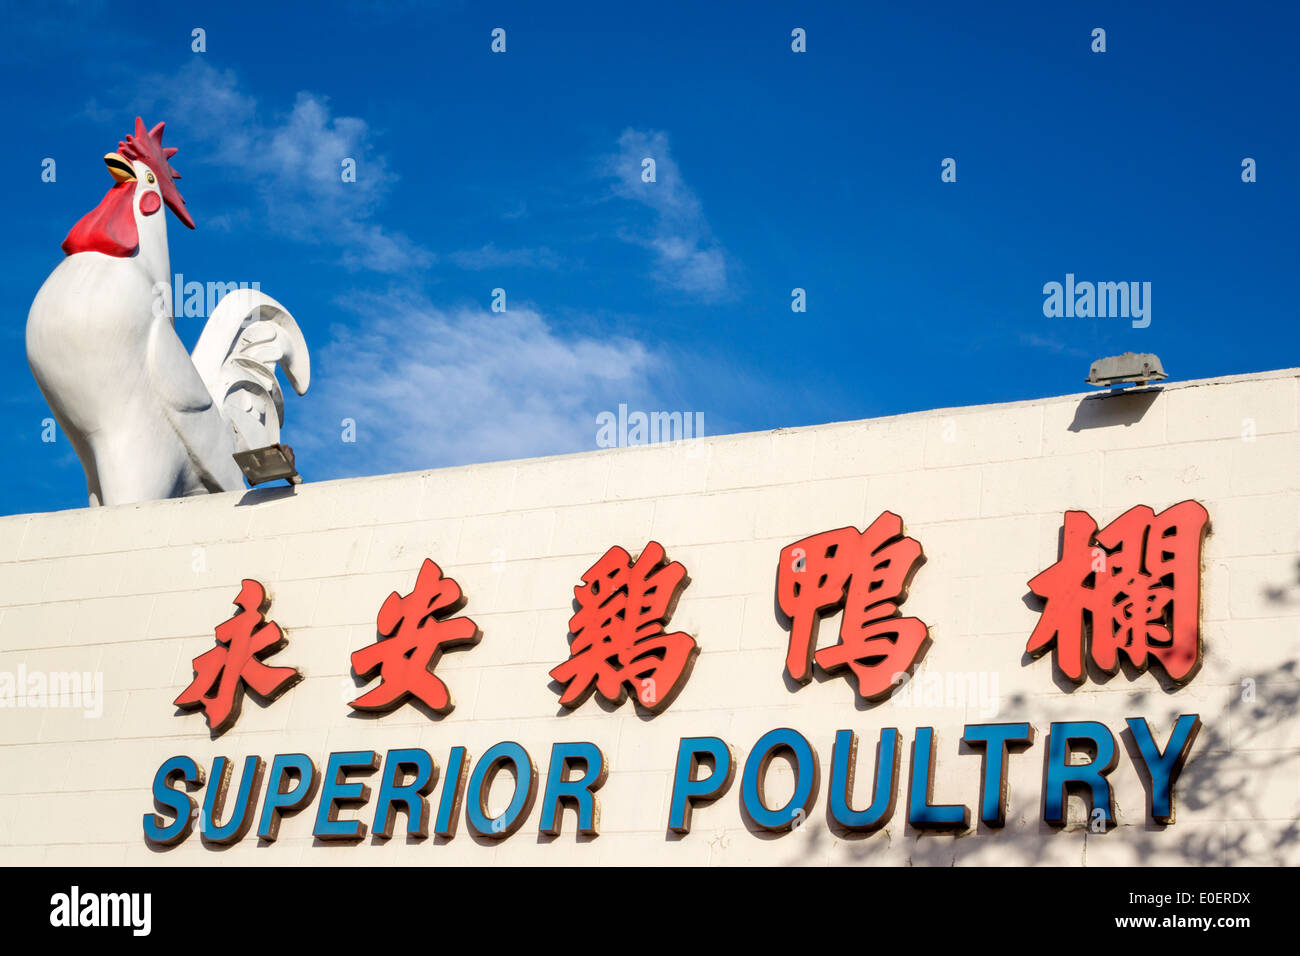 Los Angeles California,Chinatown,North Broadway neighborhood,Superior Poultry,live poultry market,sign,bilingual,Chinese,characters,logogram,hanzi,roo Stock Photo